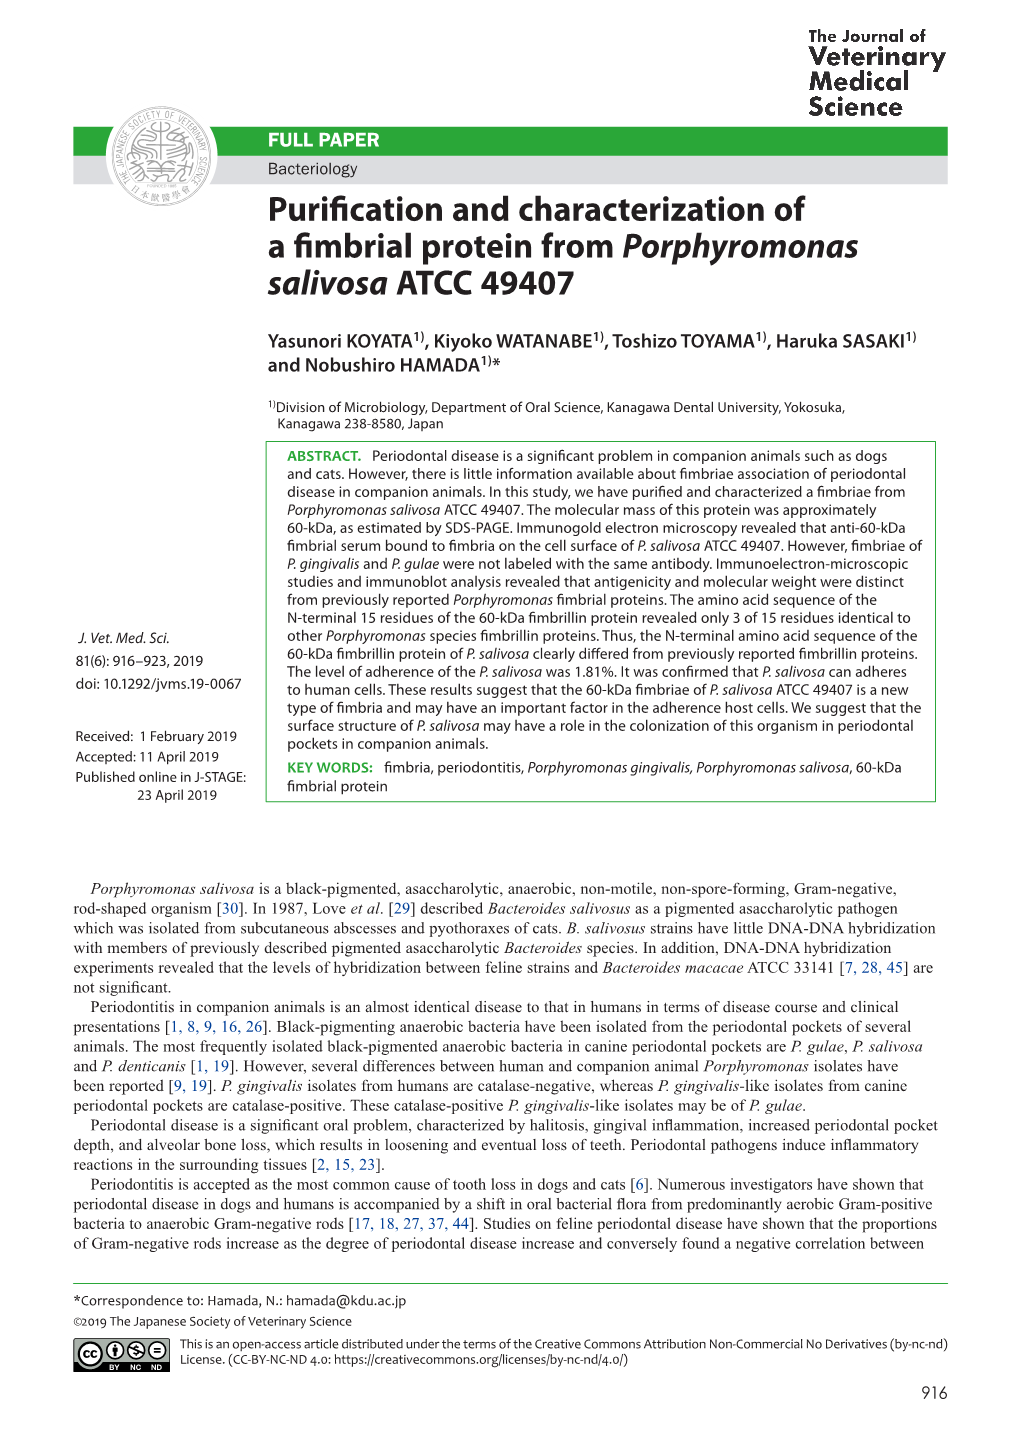 Purification and Characterization of a Fimbrial Protein from Porphyromonas Salivosa ATCC 49407